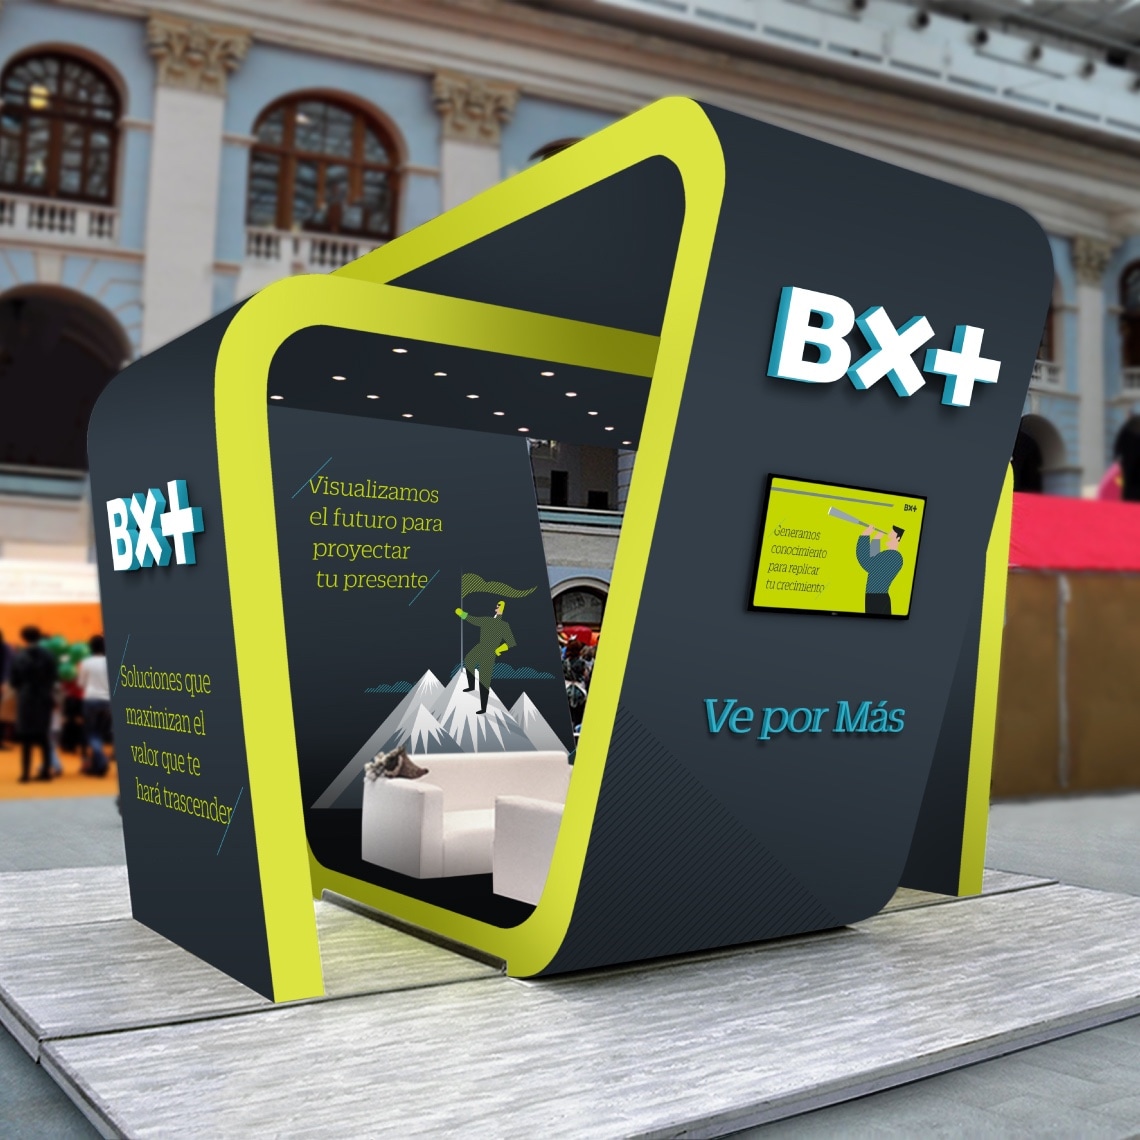 Example of a kiosk designed for BX+